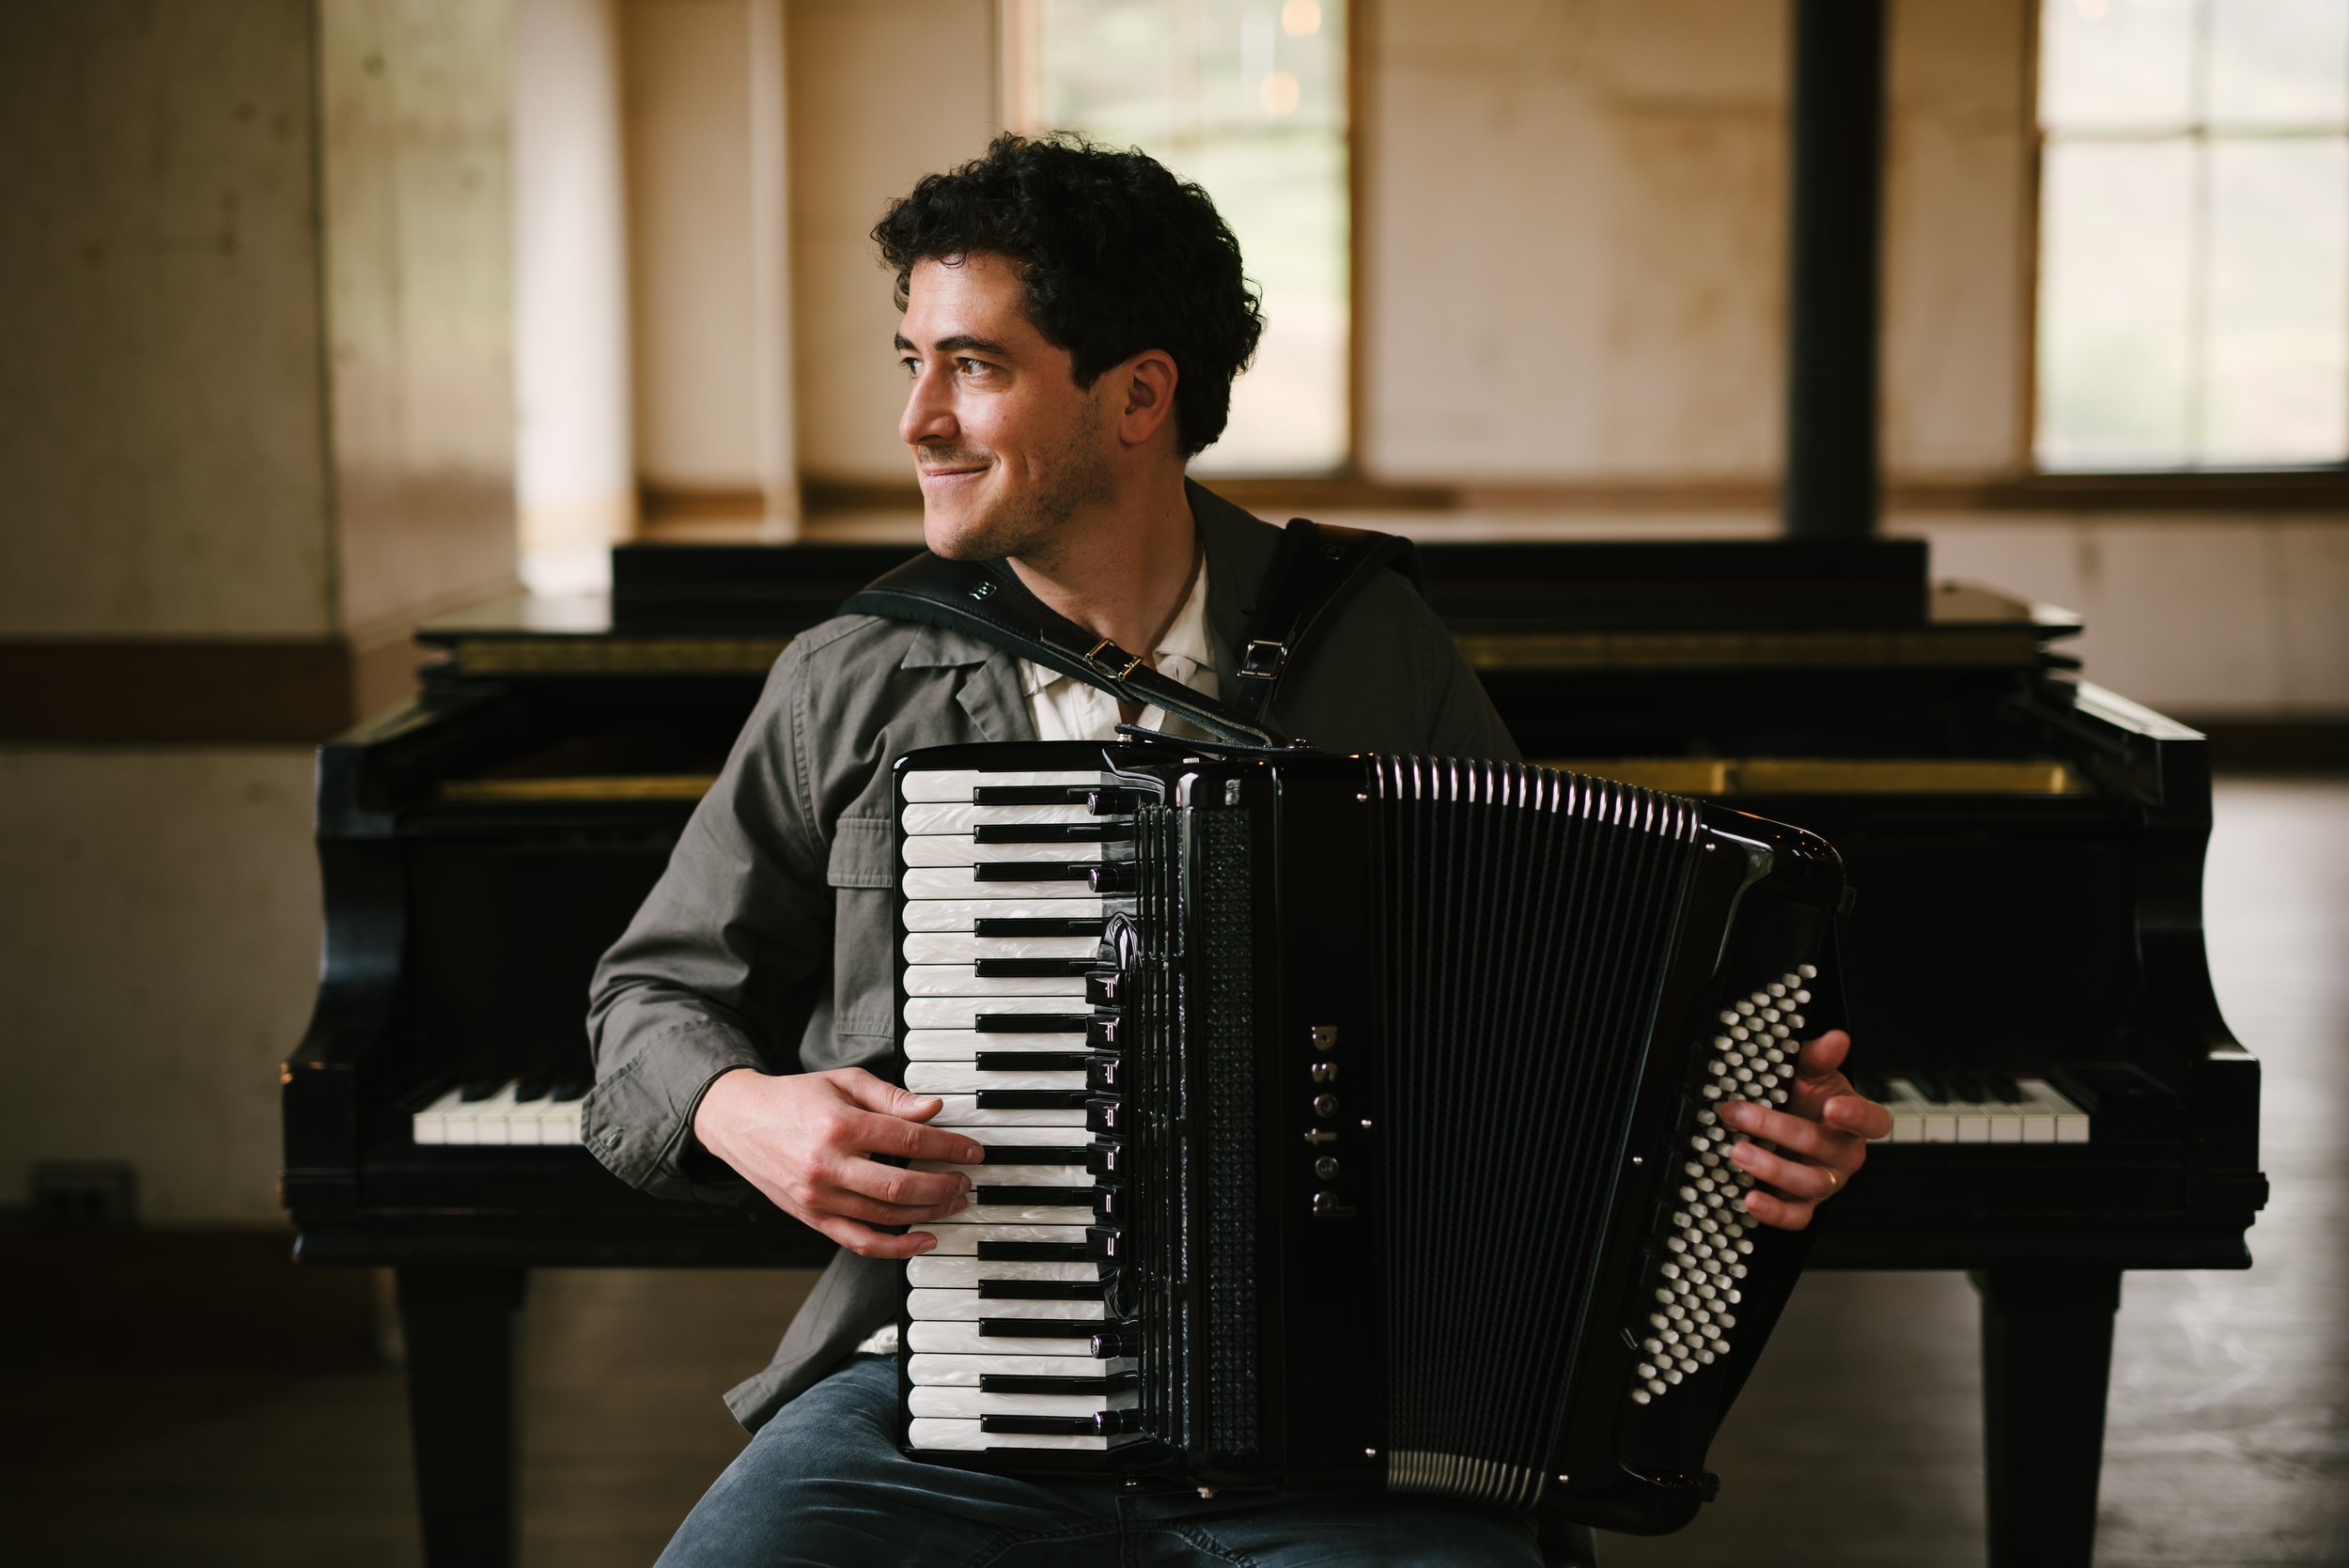 Sam Reider, lookng to the left, holding an accordion. Behind him, a piano.  